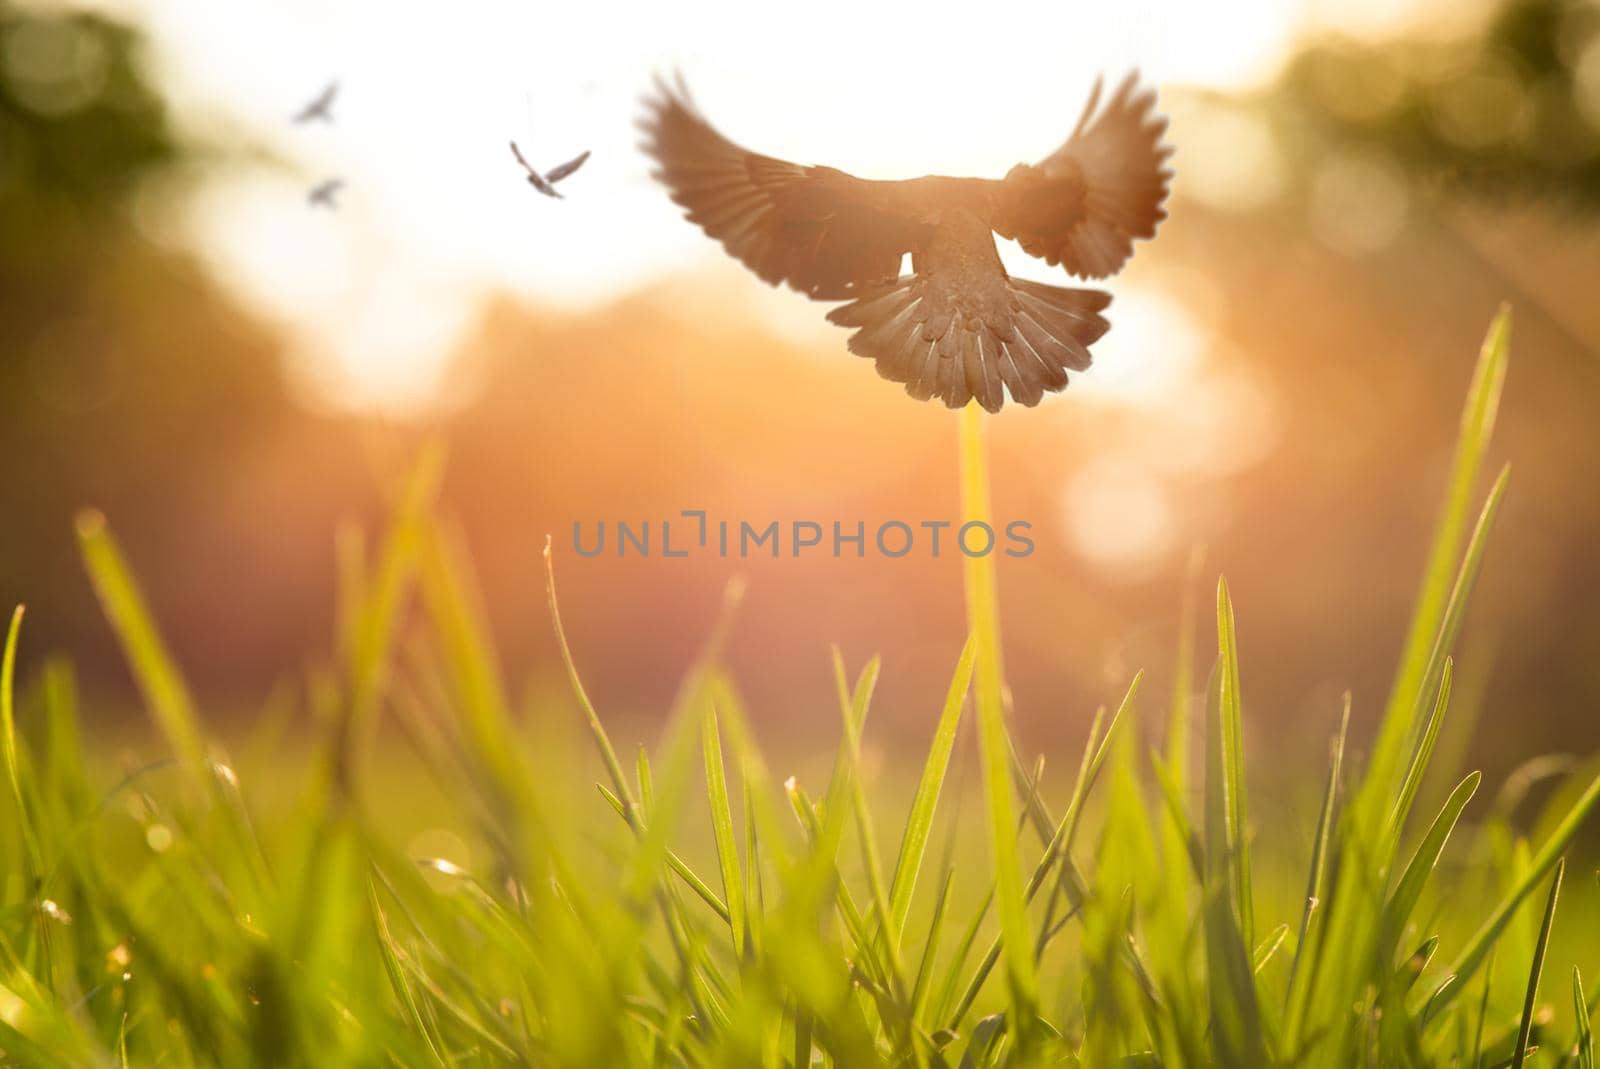 Flying birds over a green grass at sunset.